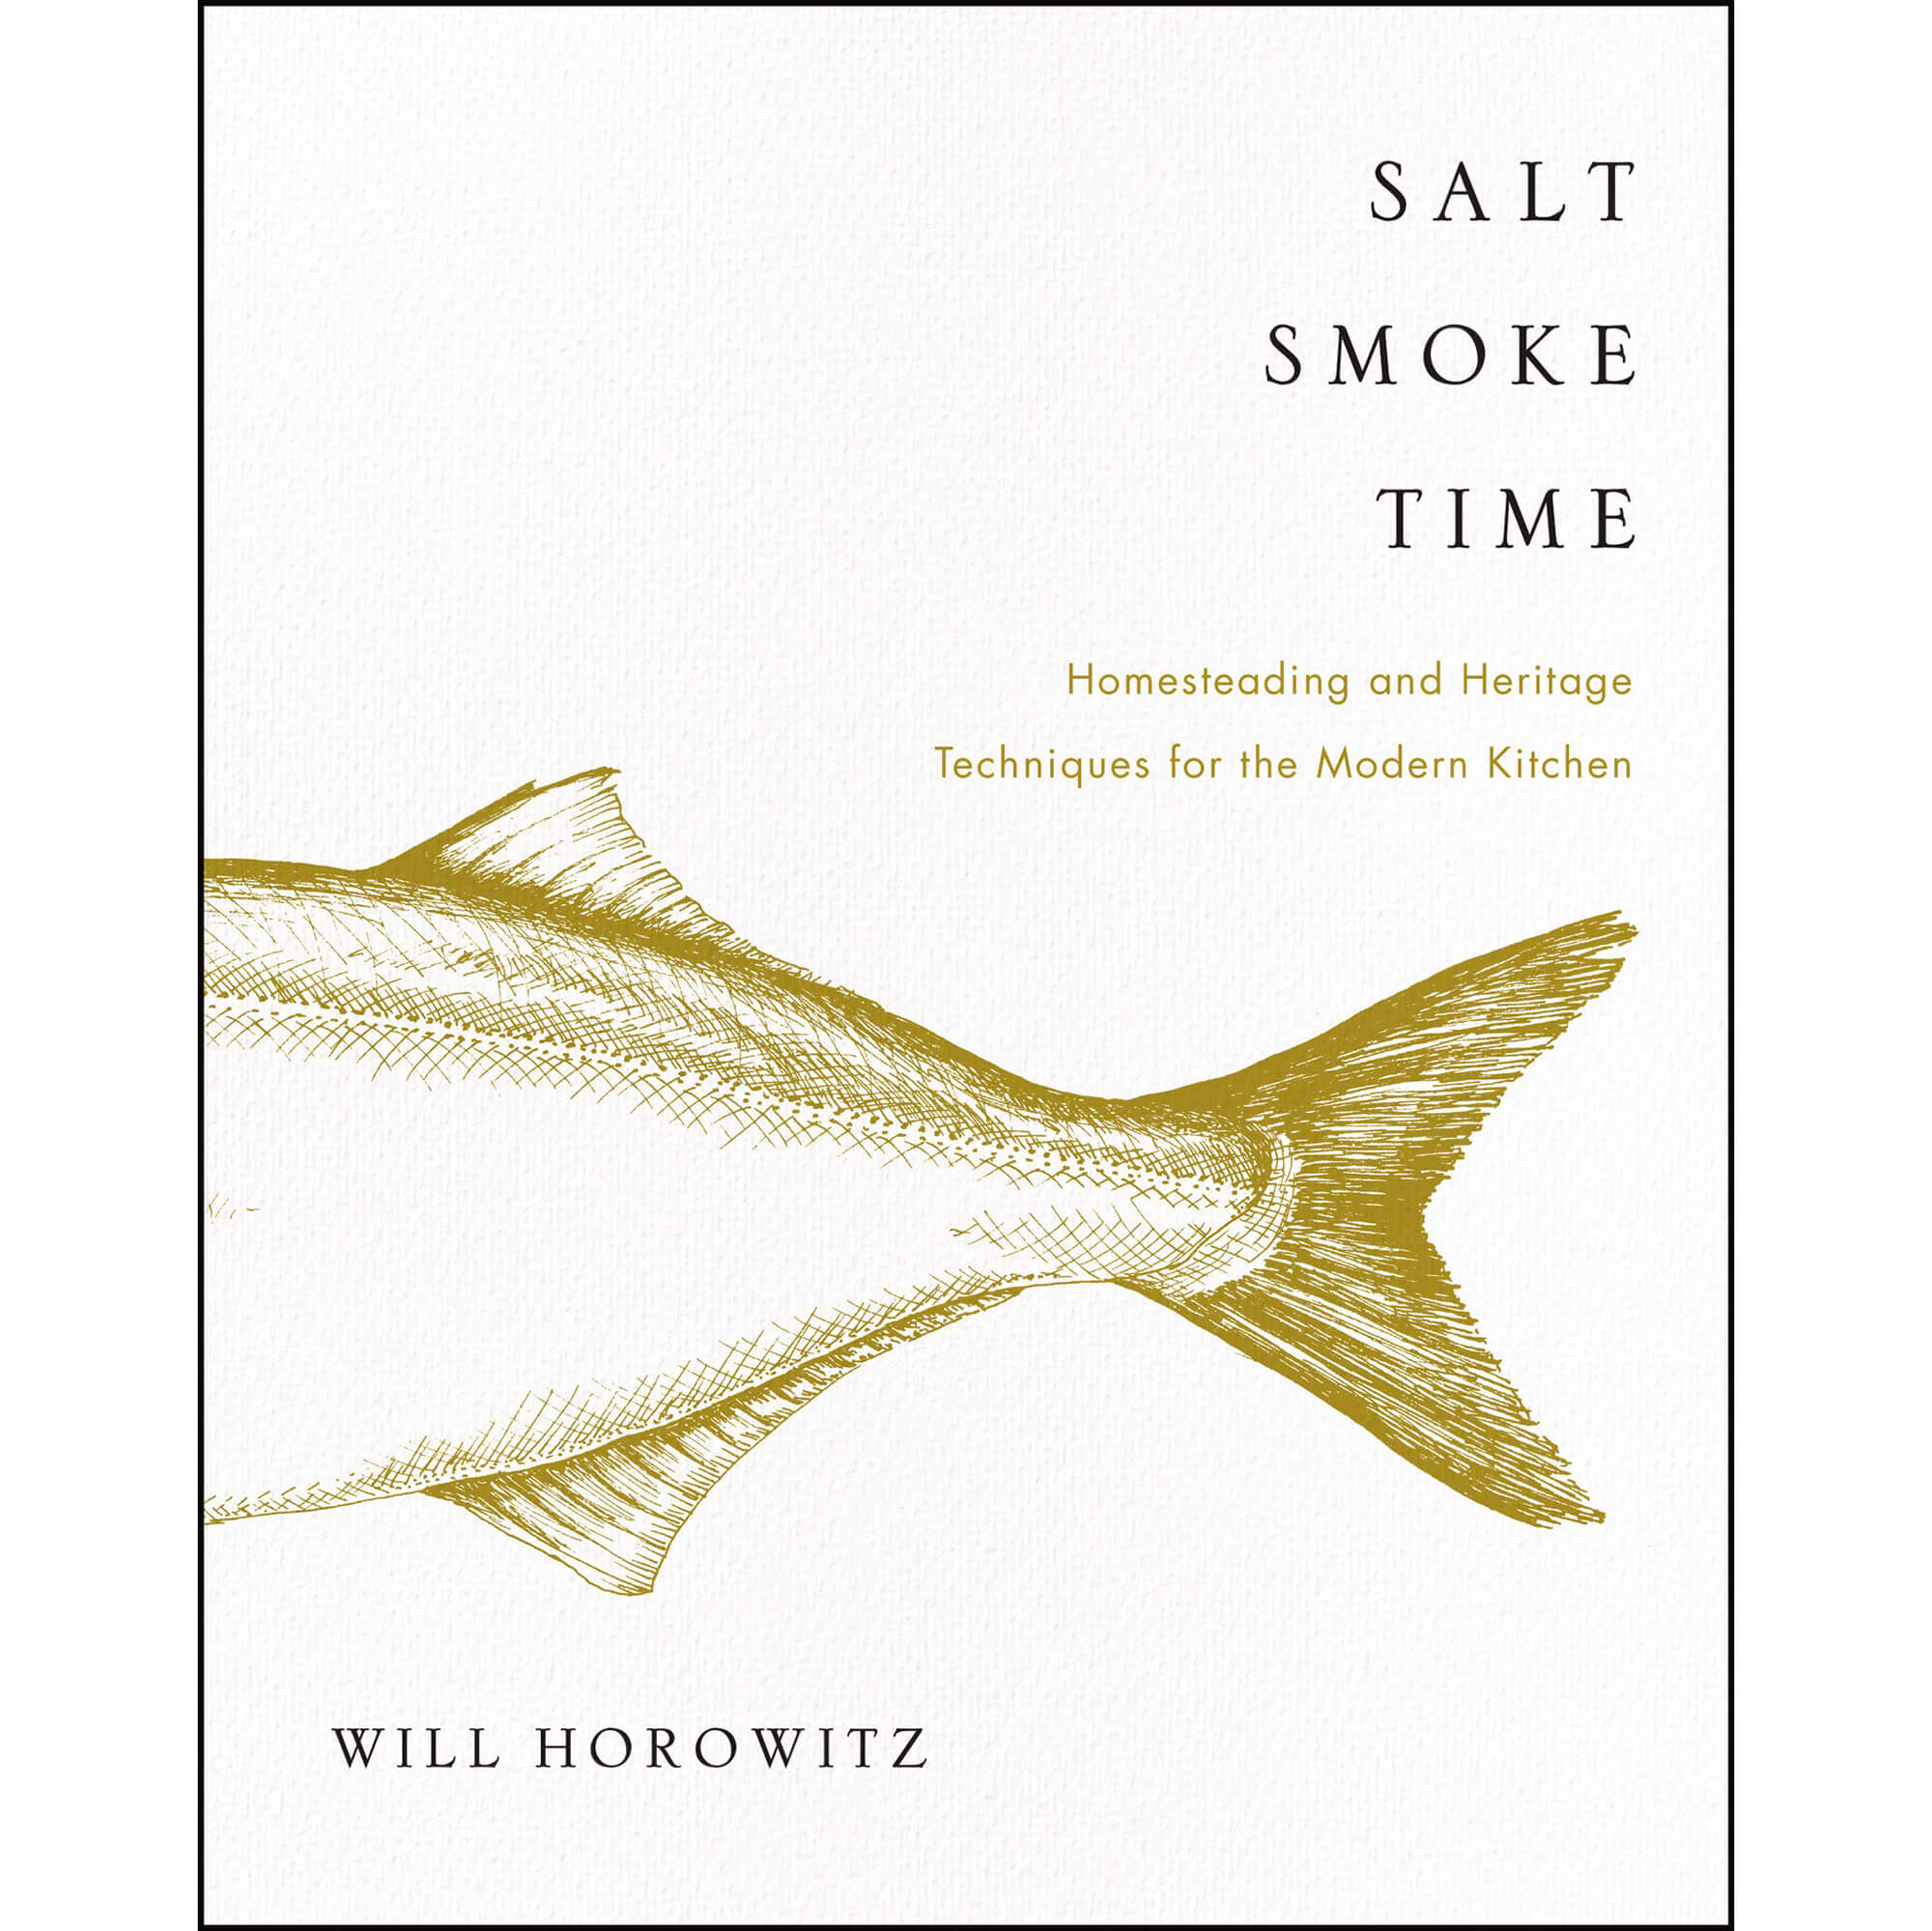 Salt Smoke Time front cover.